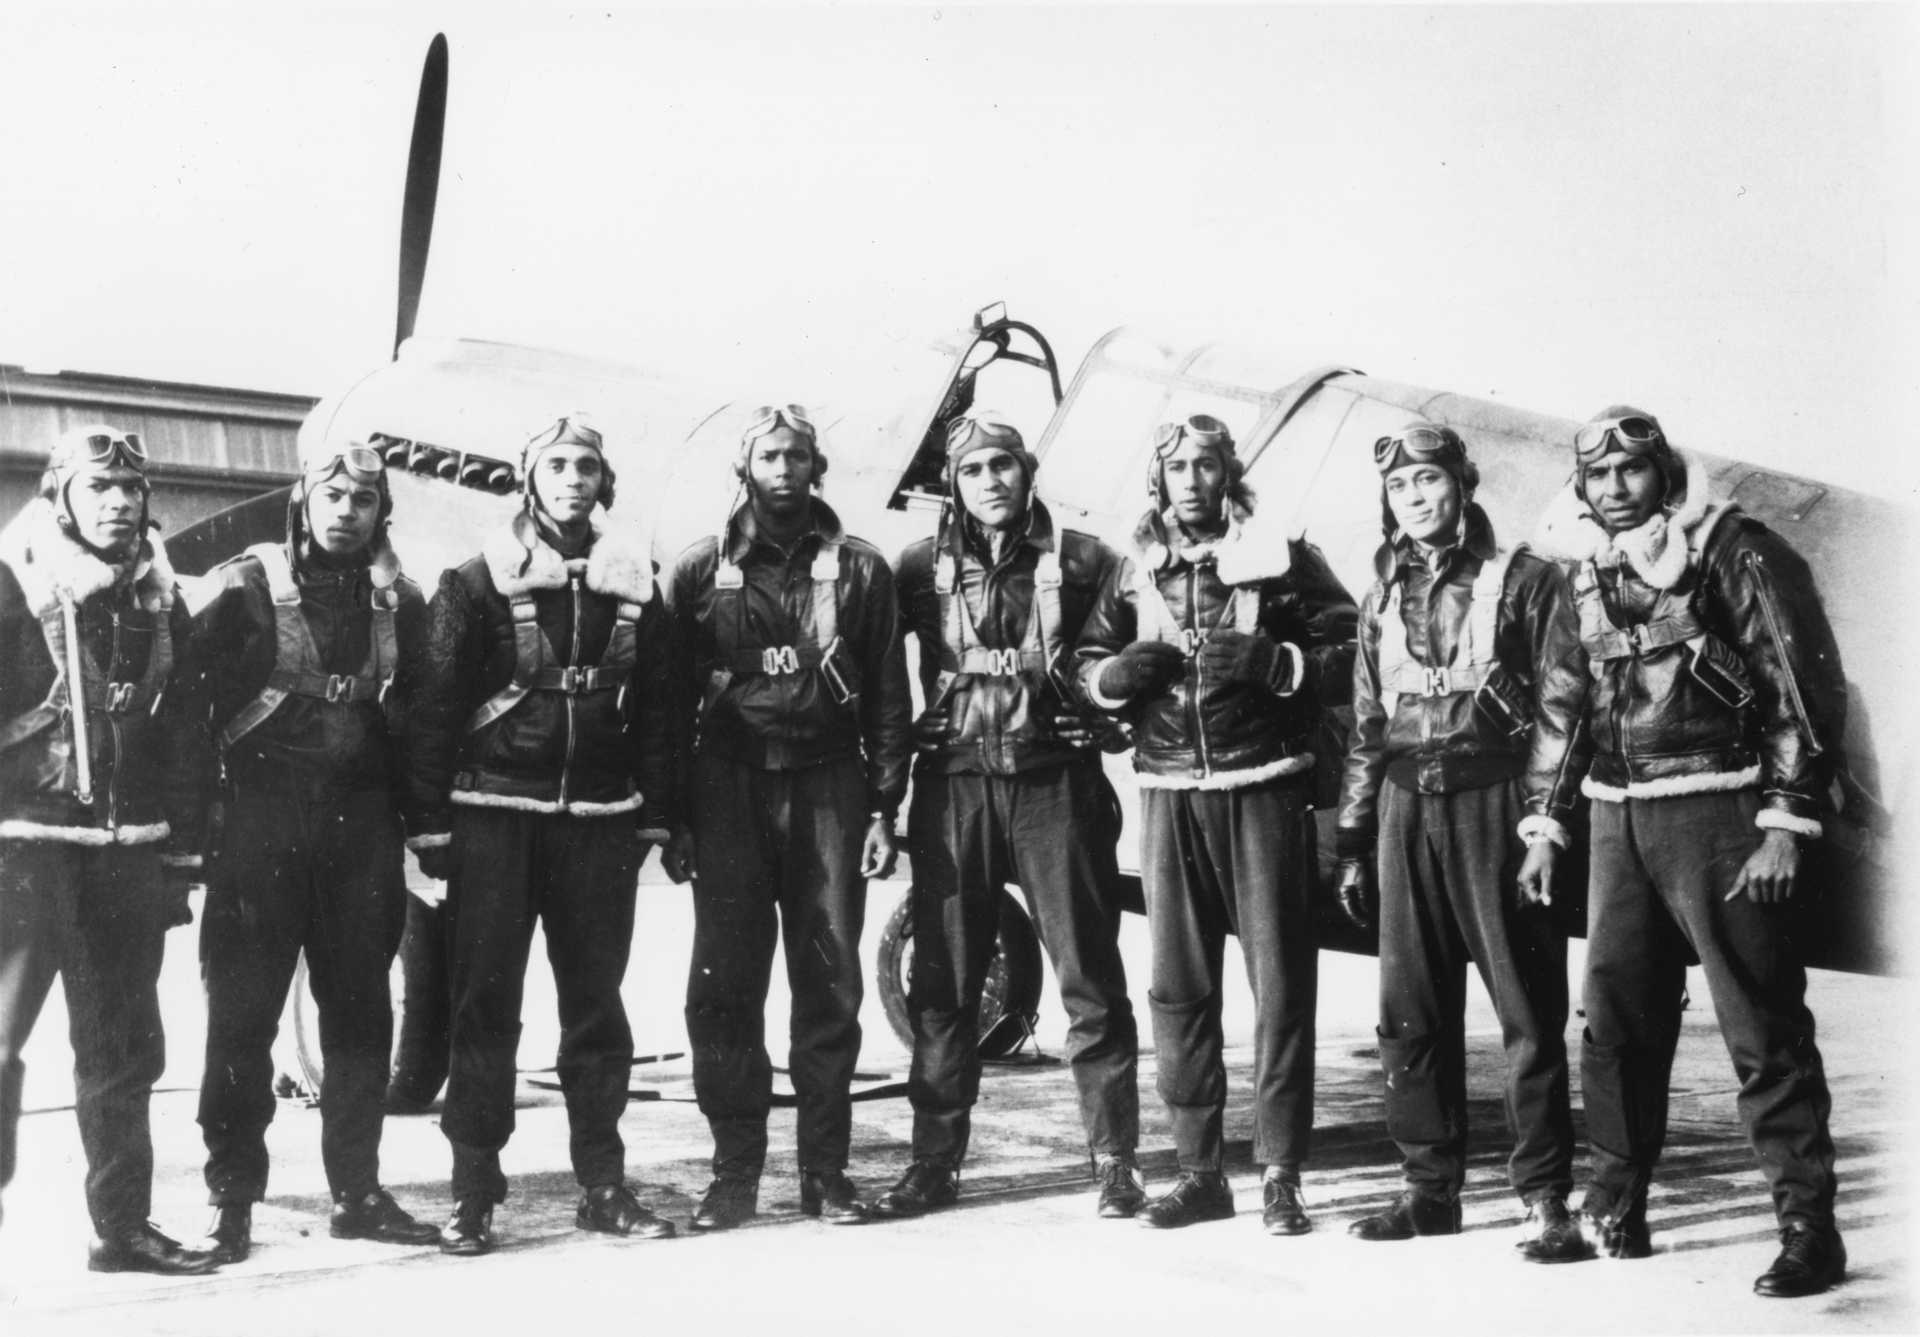 A group of Tuskegee Airmen, 1948